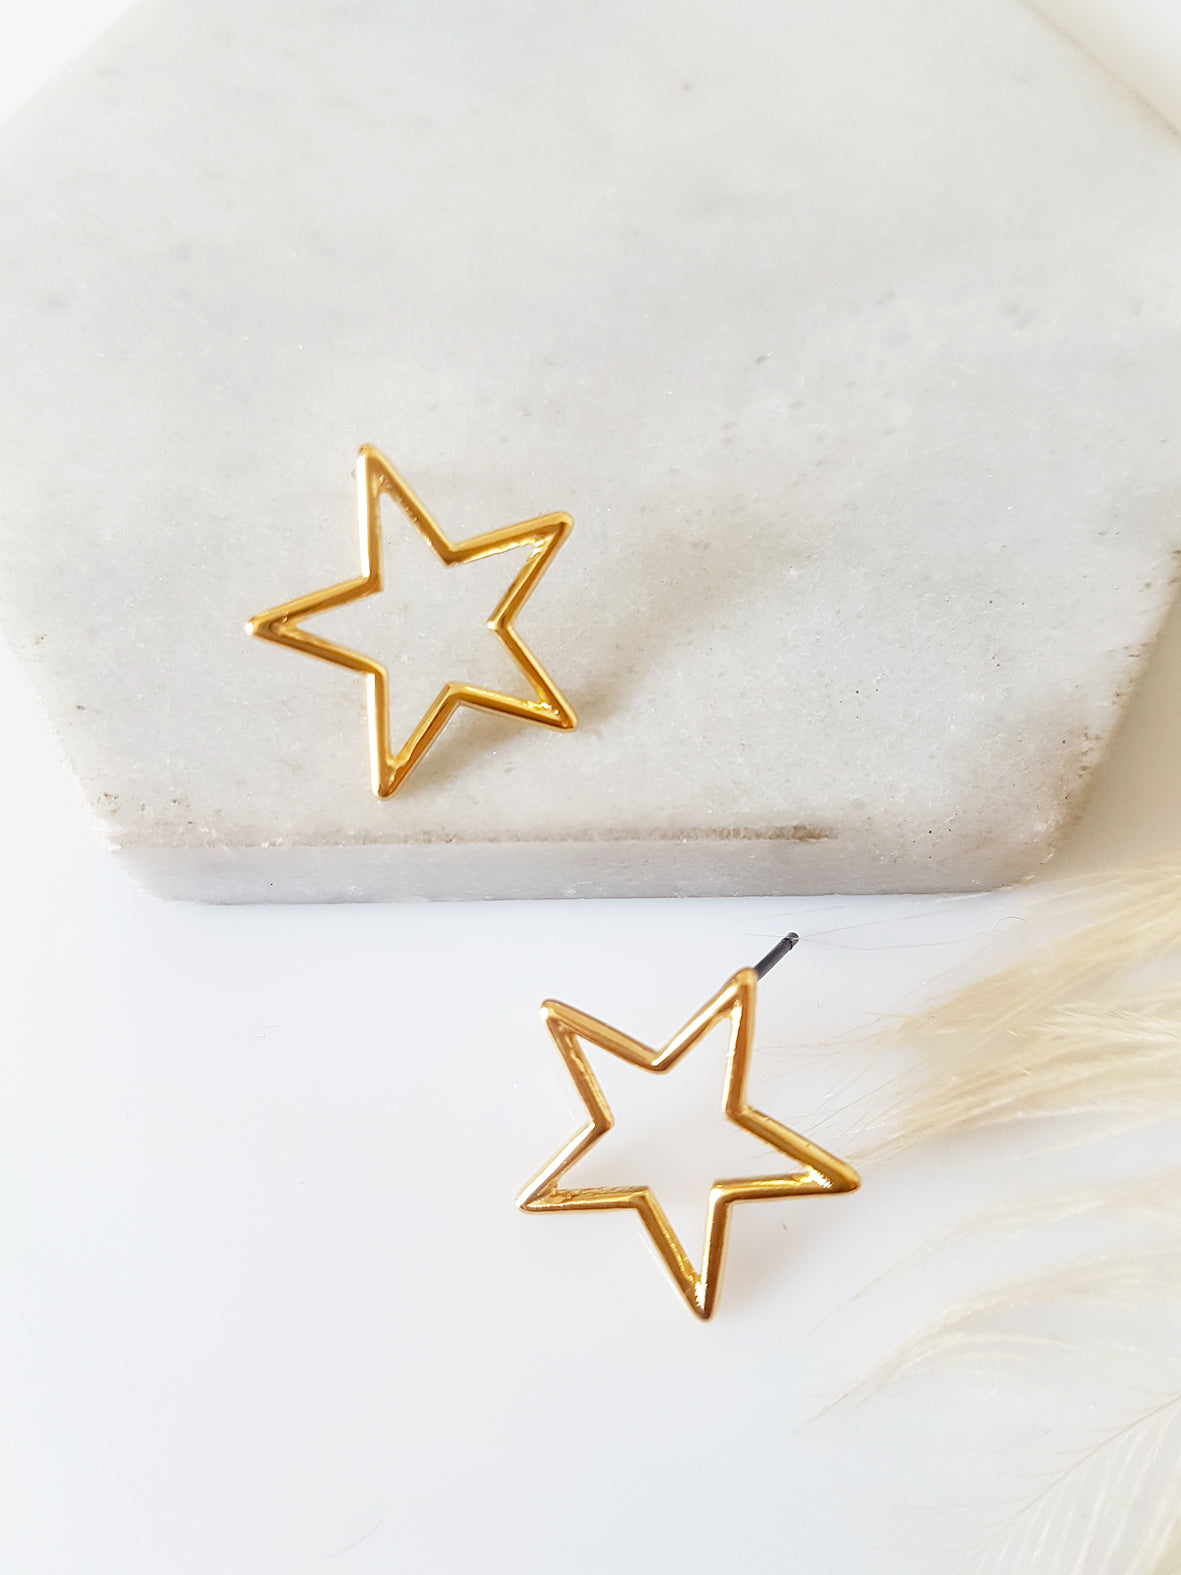 Star contour earrings, pack of 6 sets (12pcs)